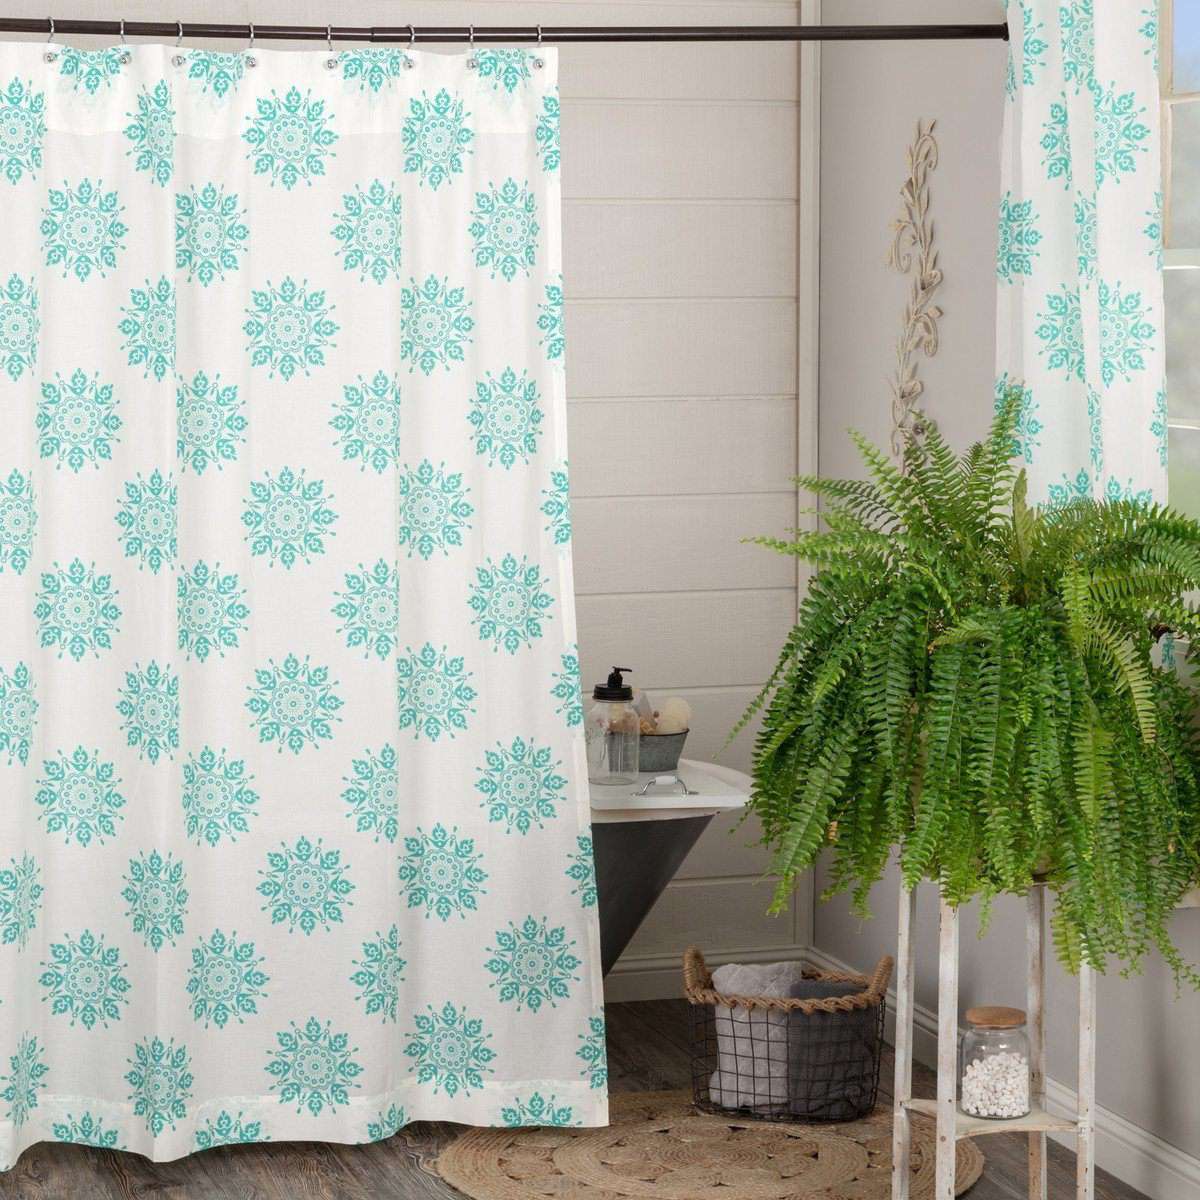 Mariposa Turquoise Shower Curtain 72"x72" curtain VHC Brands 